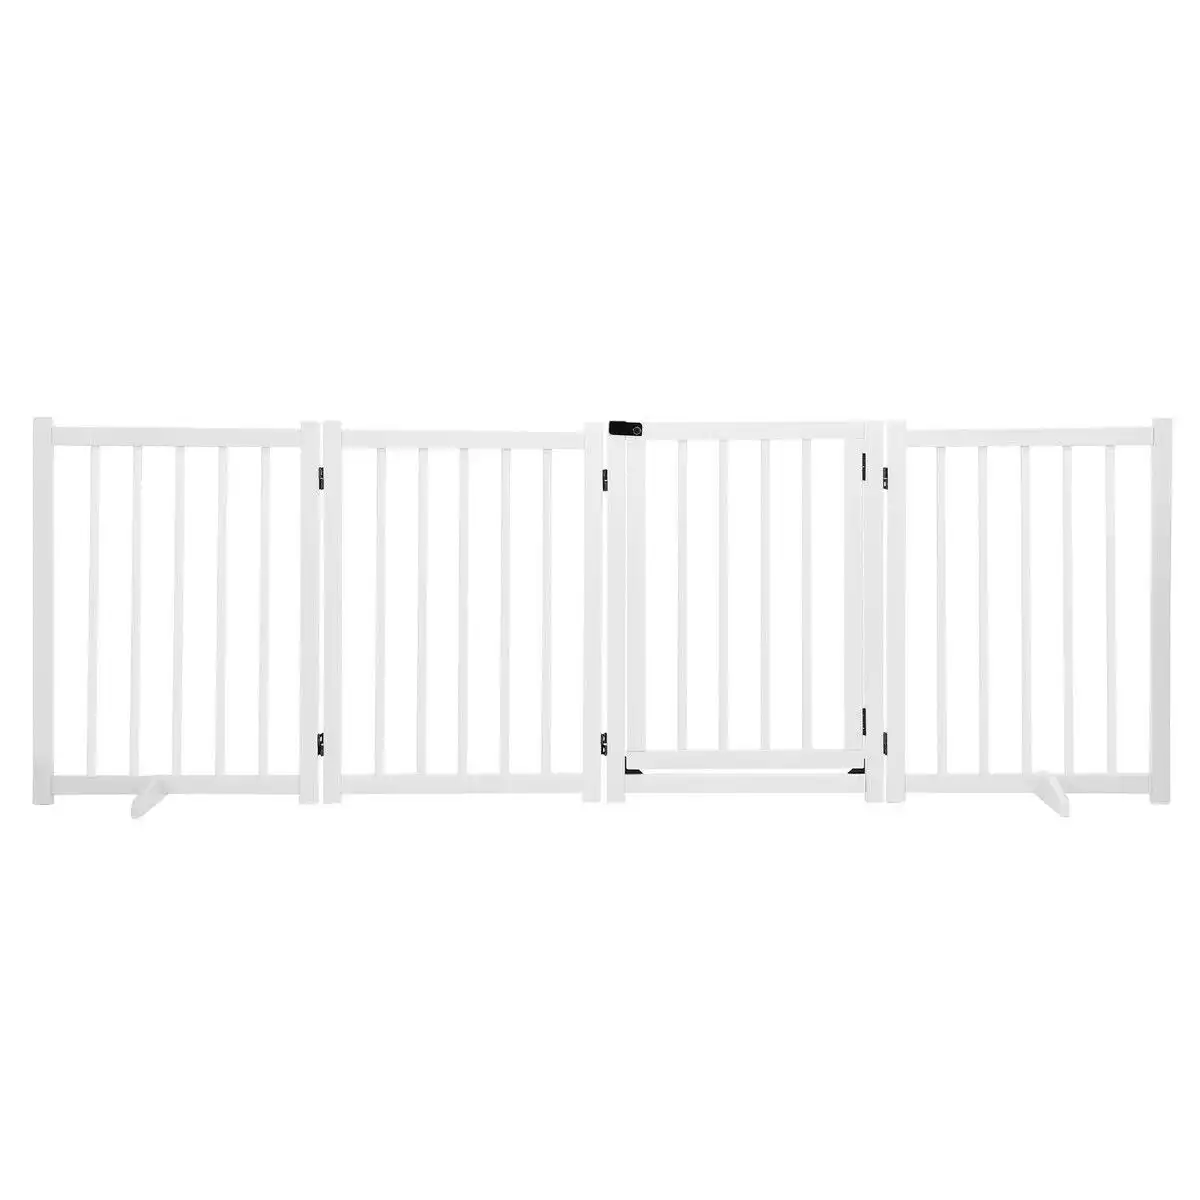 Pet Scene Pet Safety Gate 4 Panel Puppy Playpen Wood Enclosure Security Fence Freestanding Dog Stair Doorway Tall Barrier with Door Indoor Foldable